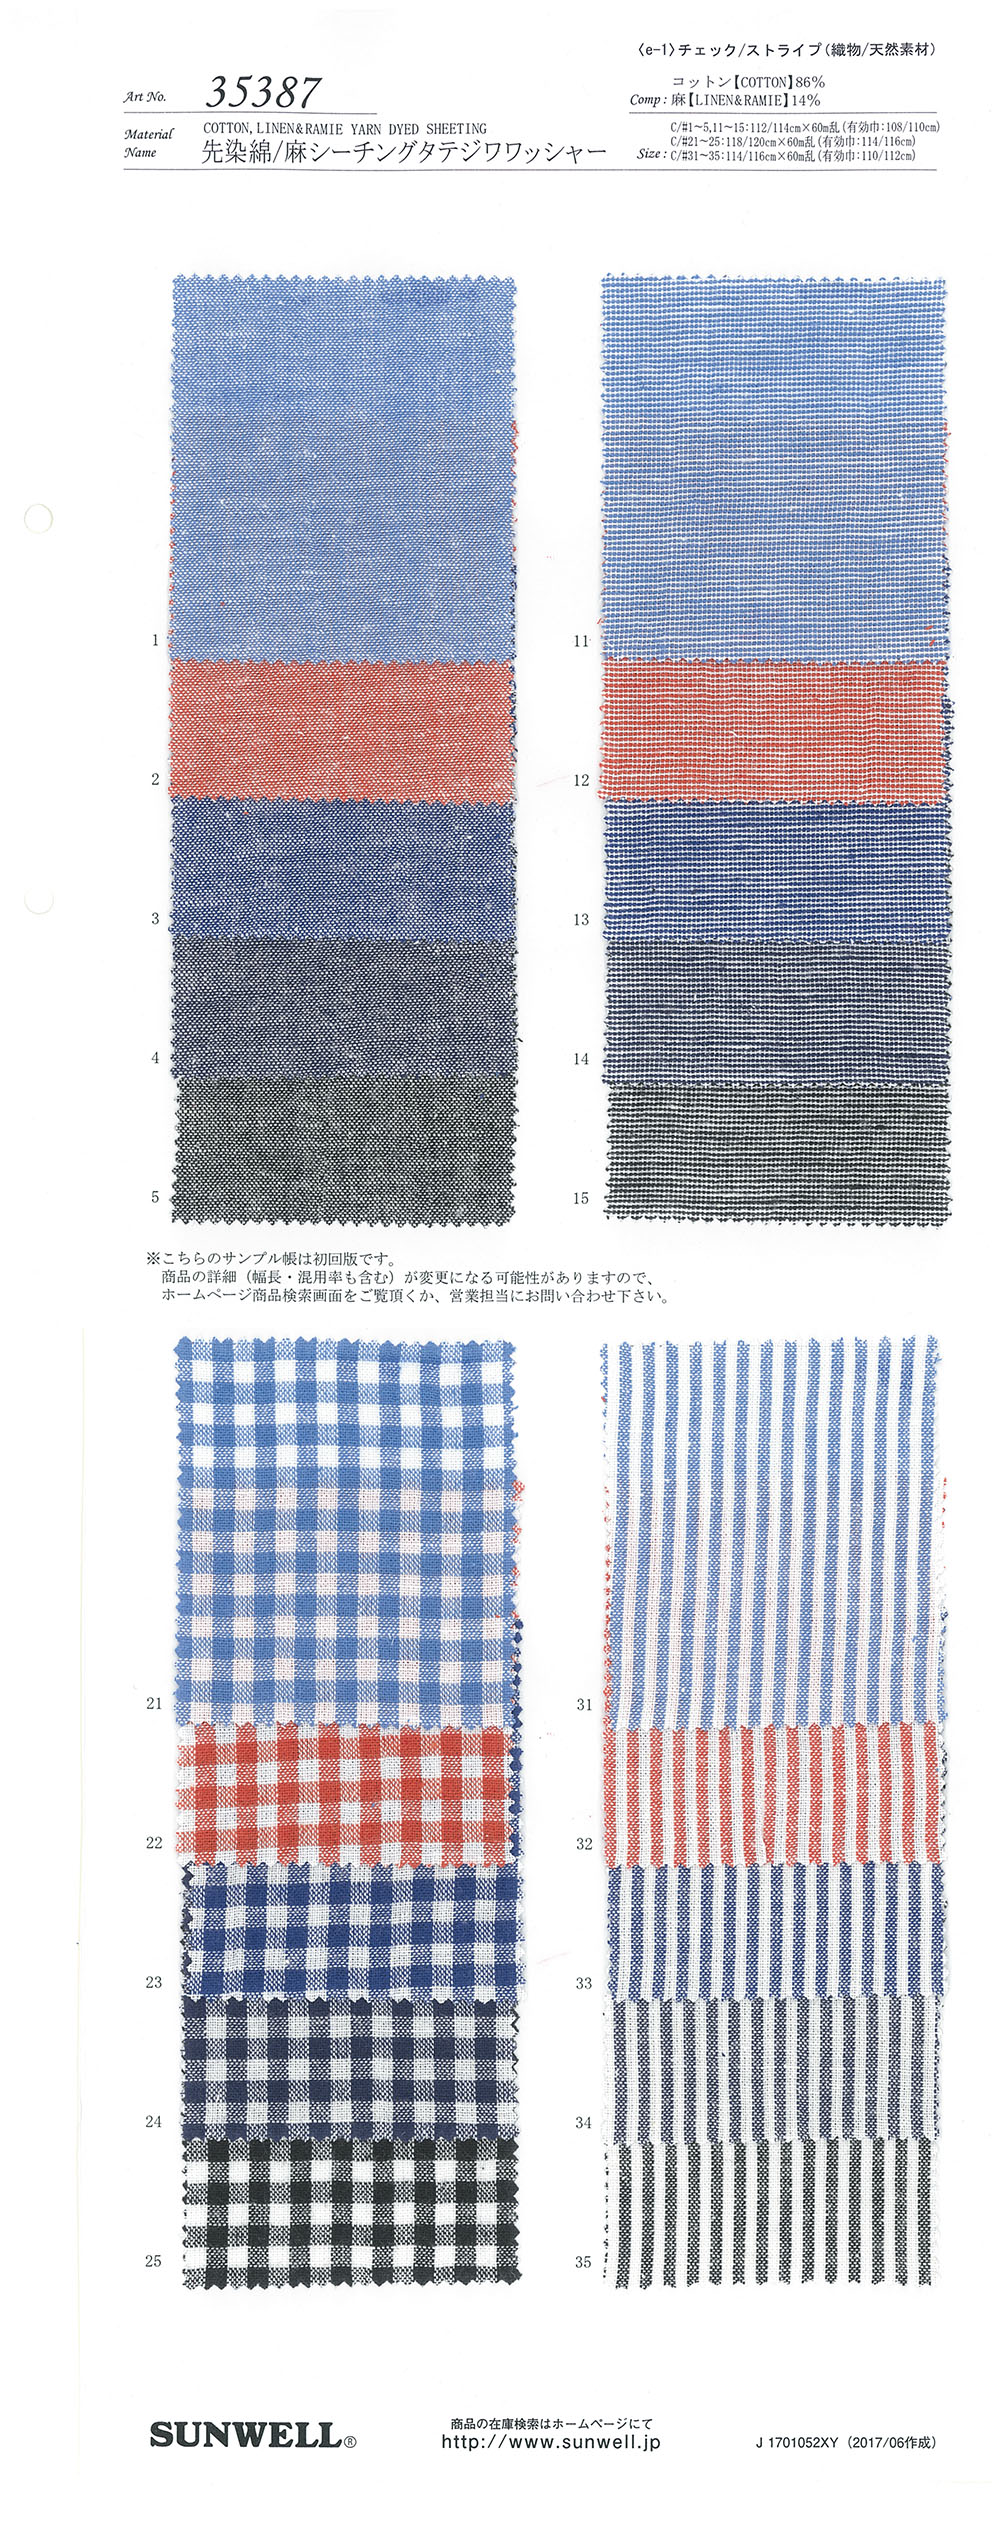 35387 Yarn-dyed Cotton/ Linen Loomstate Vertical Washer Processing[Textile / Fabric] SUNWELL